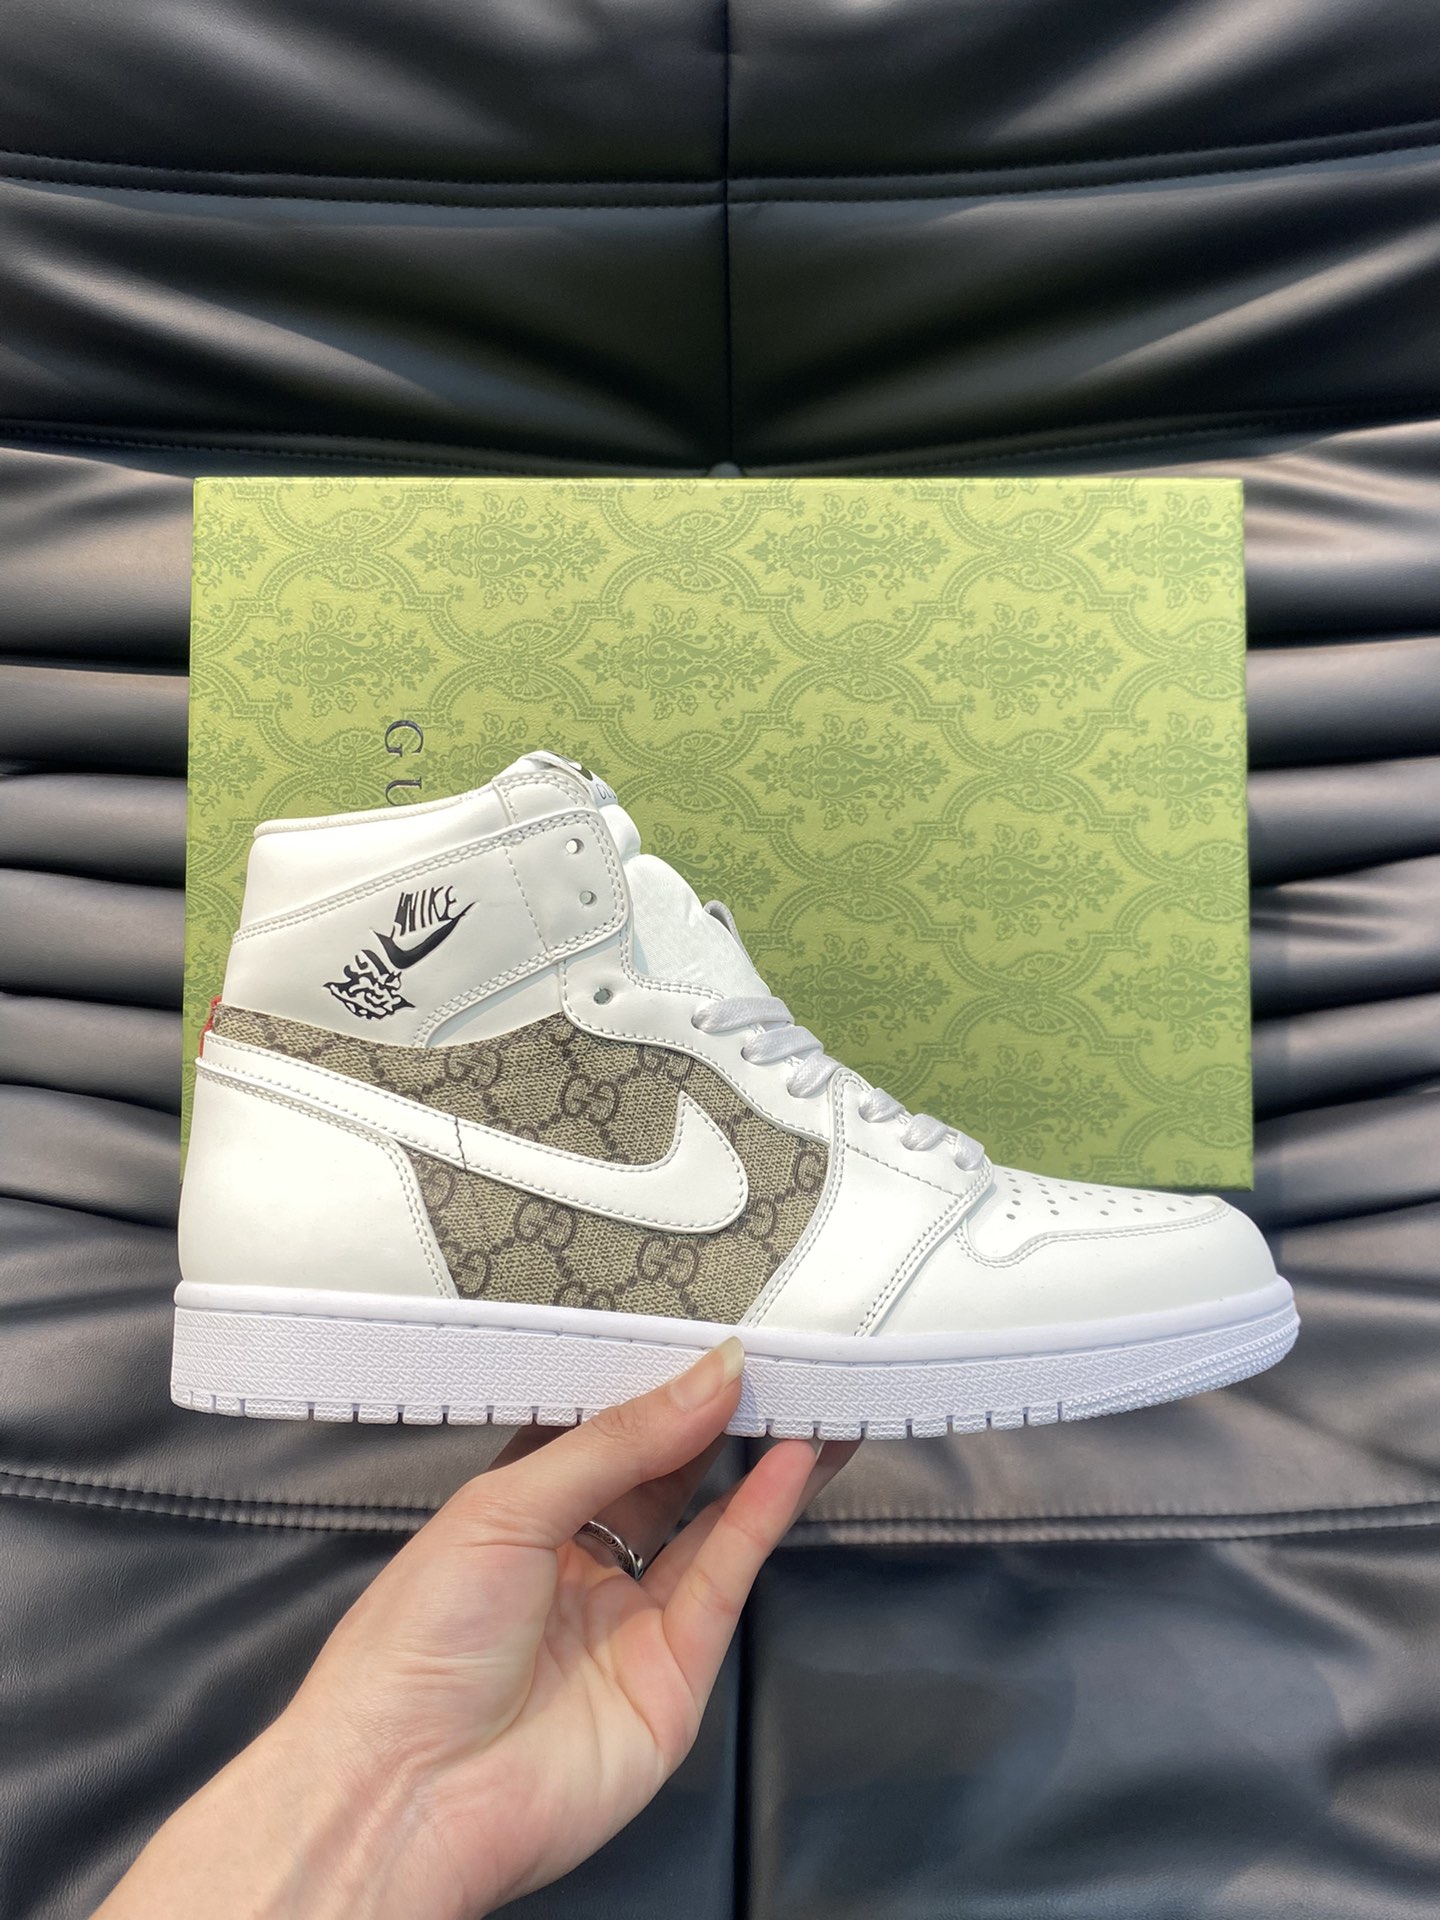 GG x N SB Dunk High new arrival sneakers 03